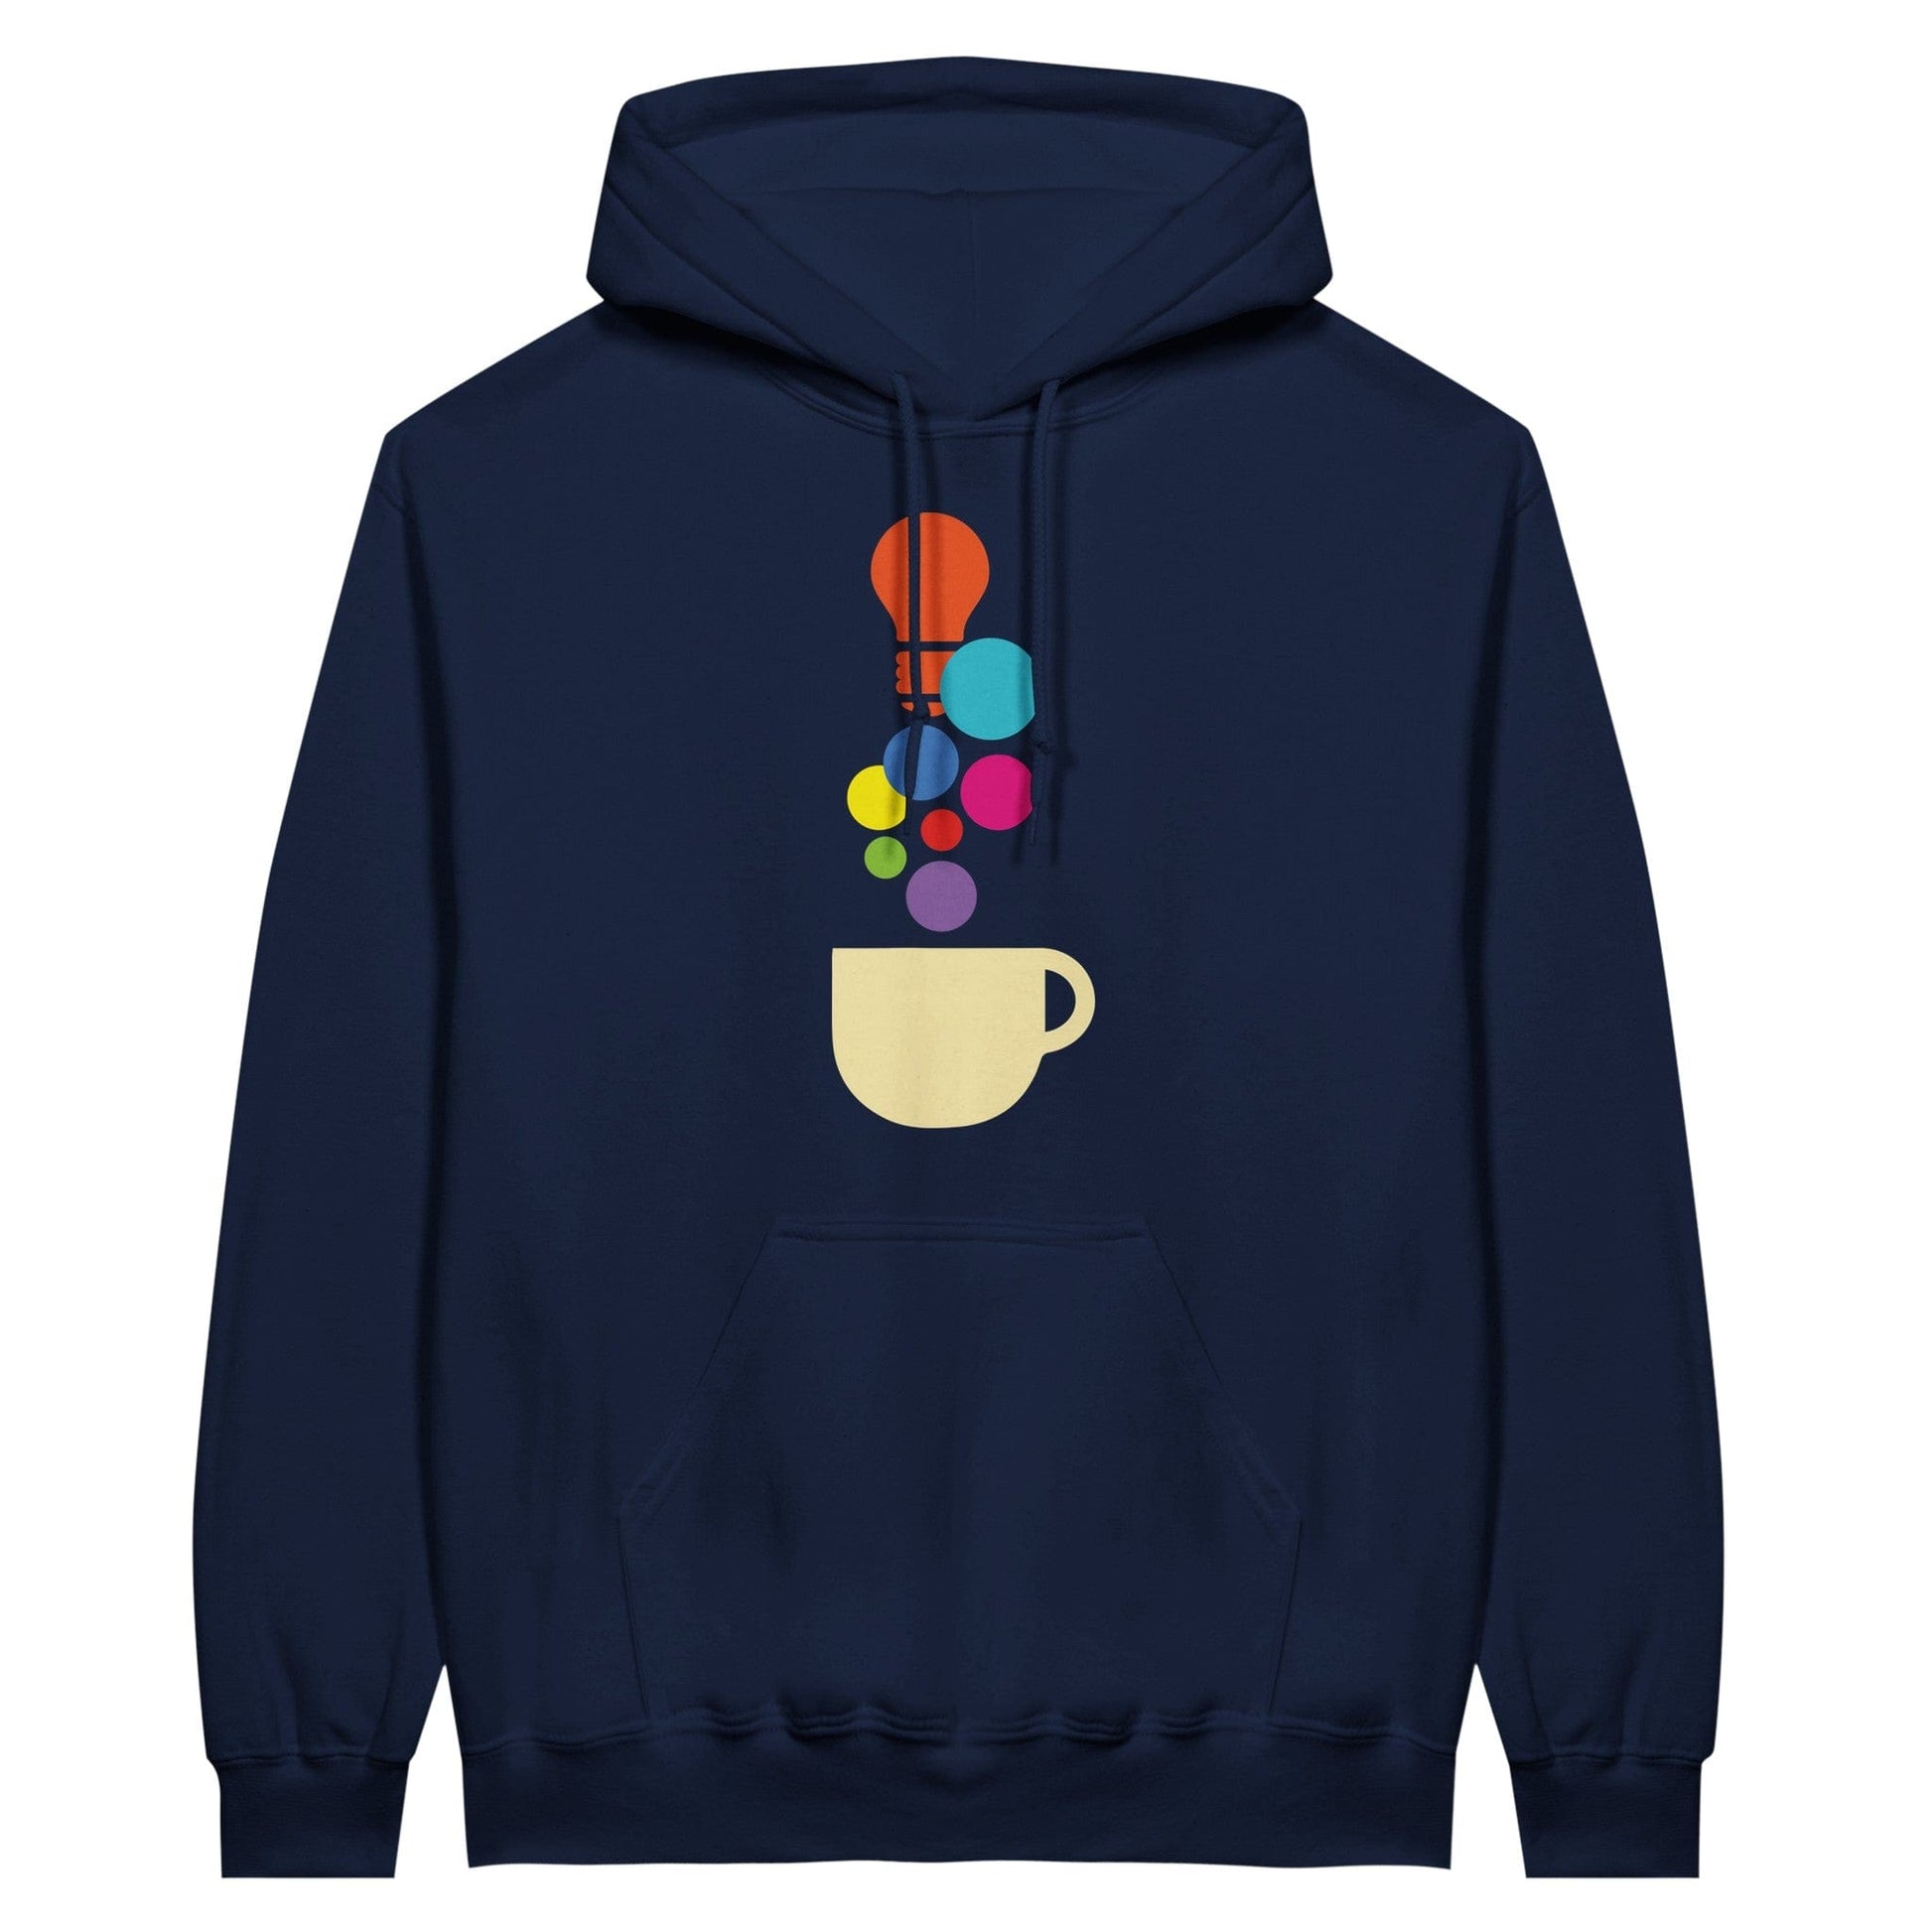 Good Bean Gifts "Creativity in a Cup" - Classic Unisex Pullover Hoodie Navy / S